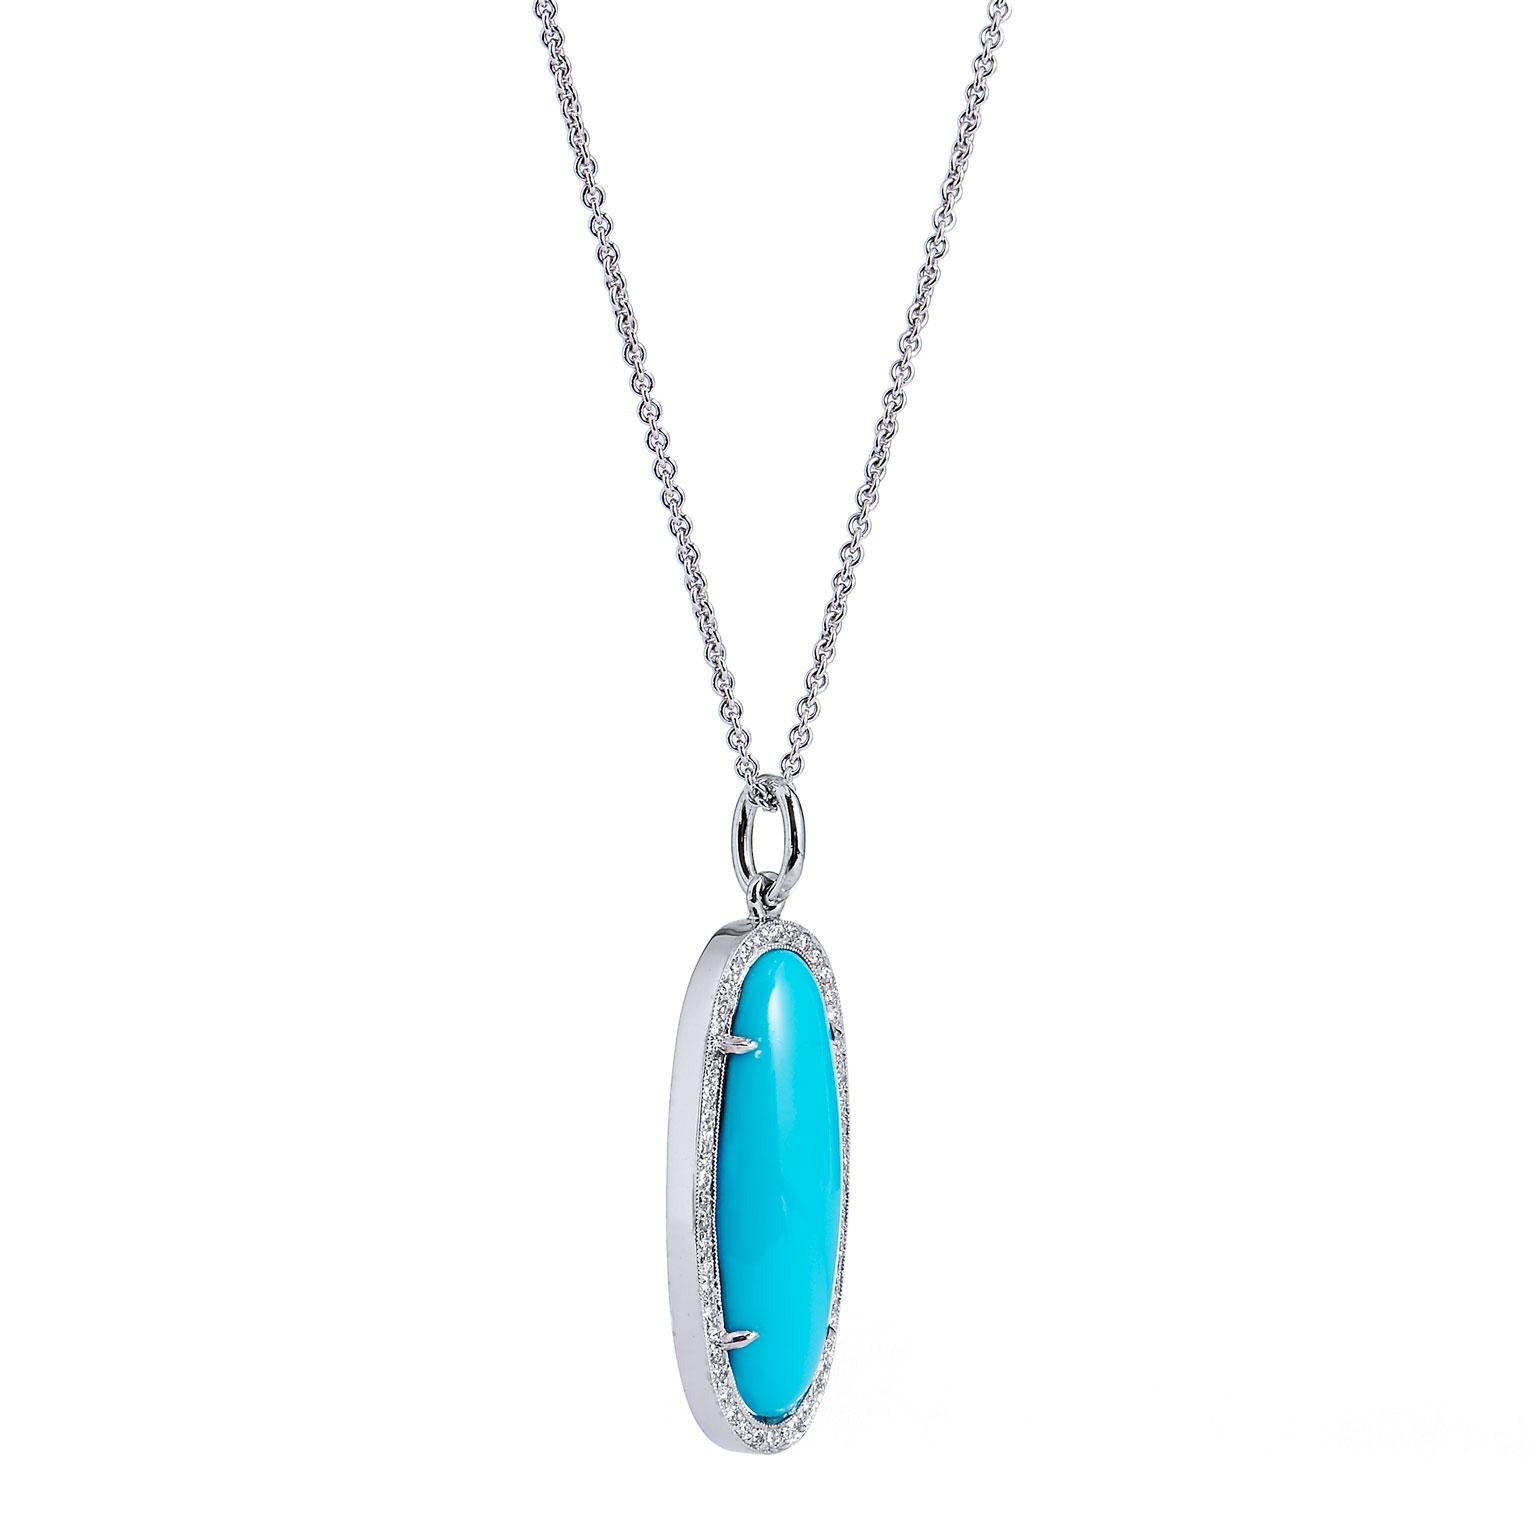 Women's H & H Synthetic Turquoise White Gold Pendant Necklace